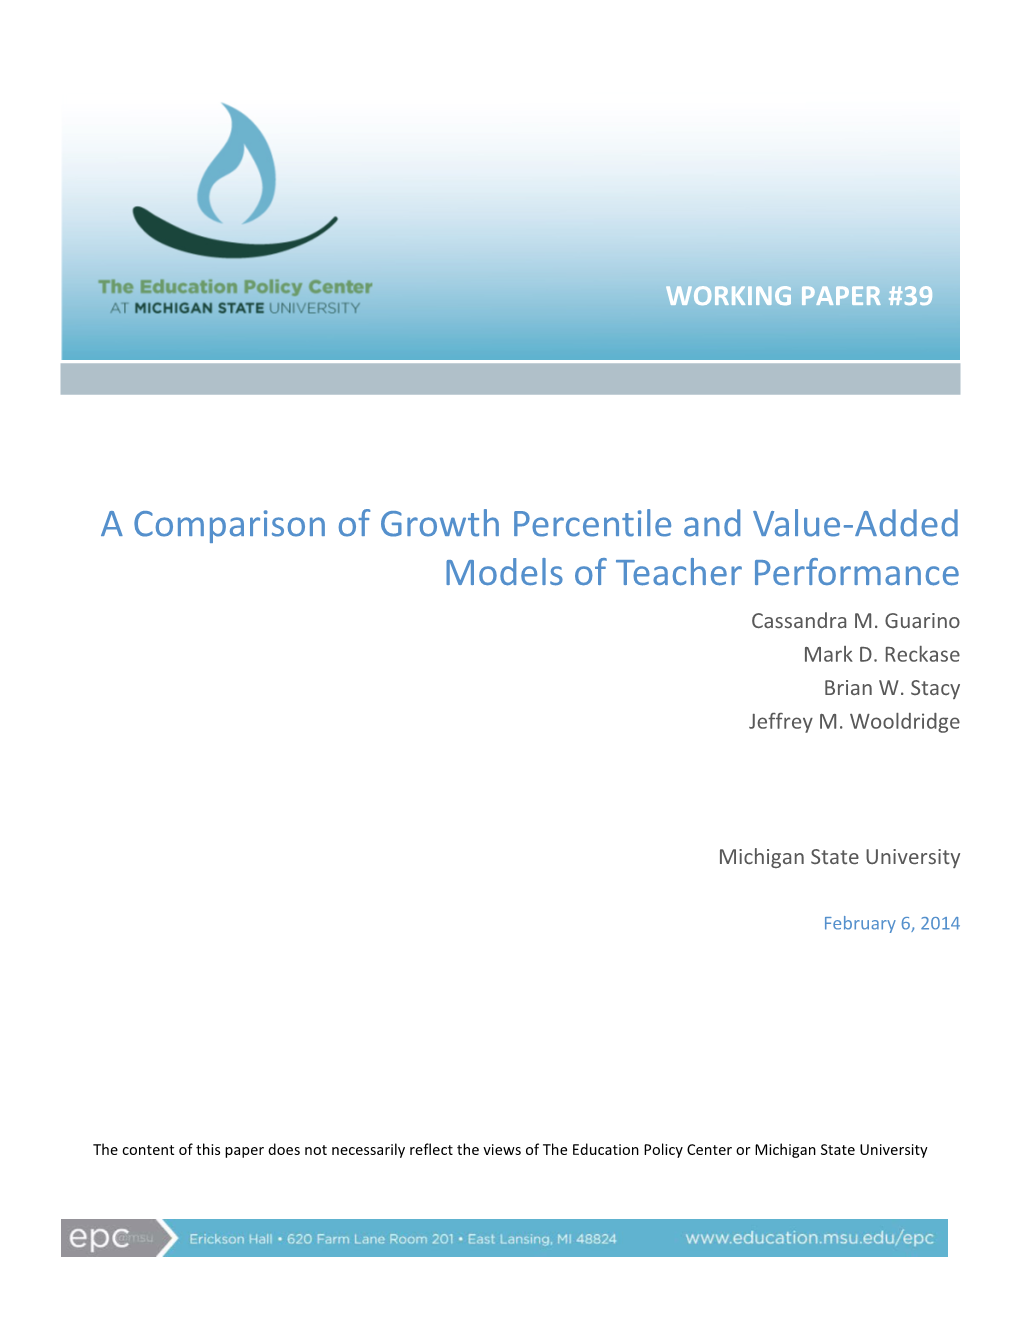 A Comparison of Growth Percentile and Value-Added Models of Teacher Performance Cassandra M